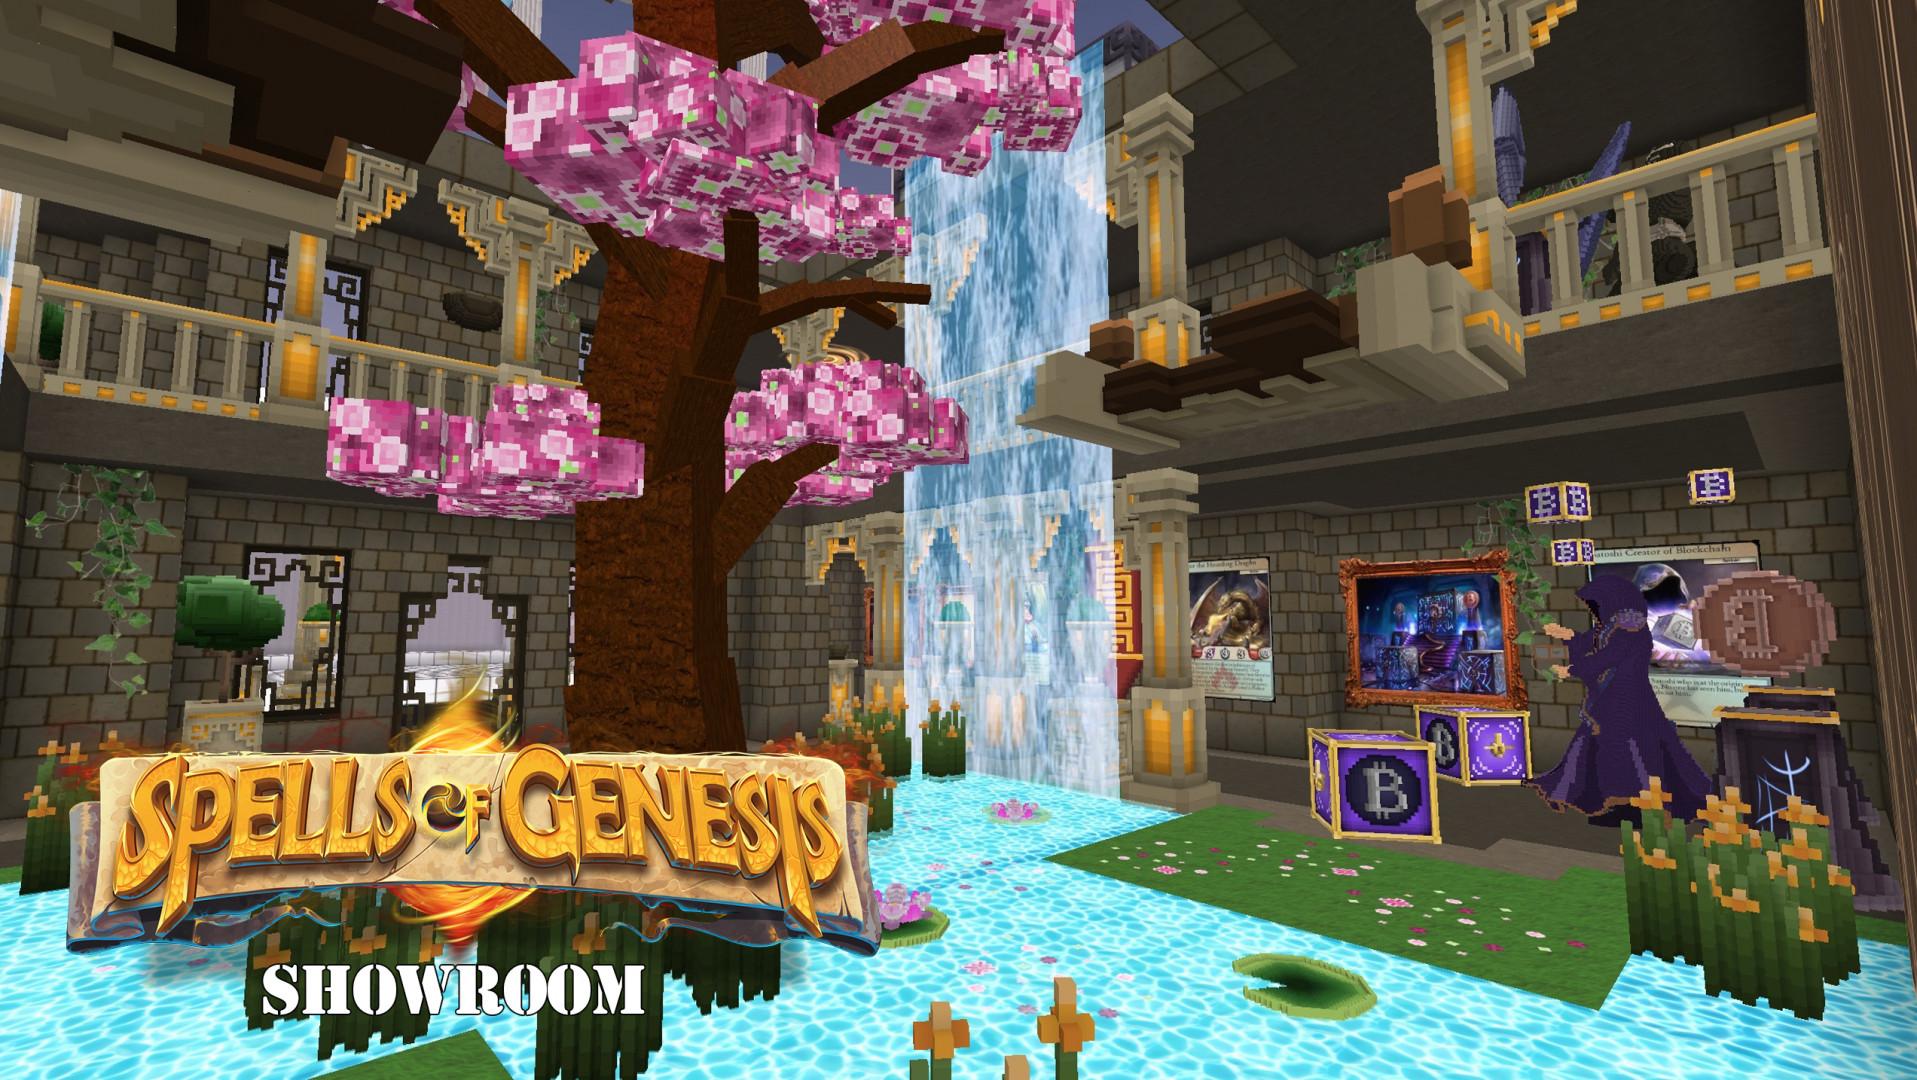 Spells of Genesis Delivers A New Metaverse Experience With Its Unique Showroom On CryptoVoxels